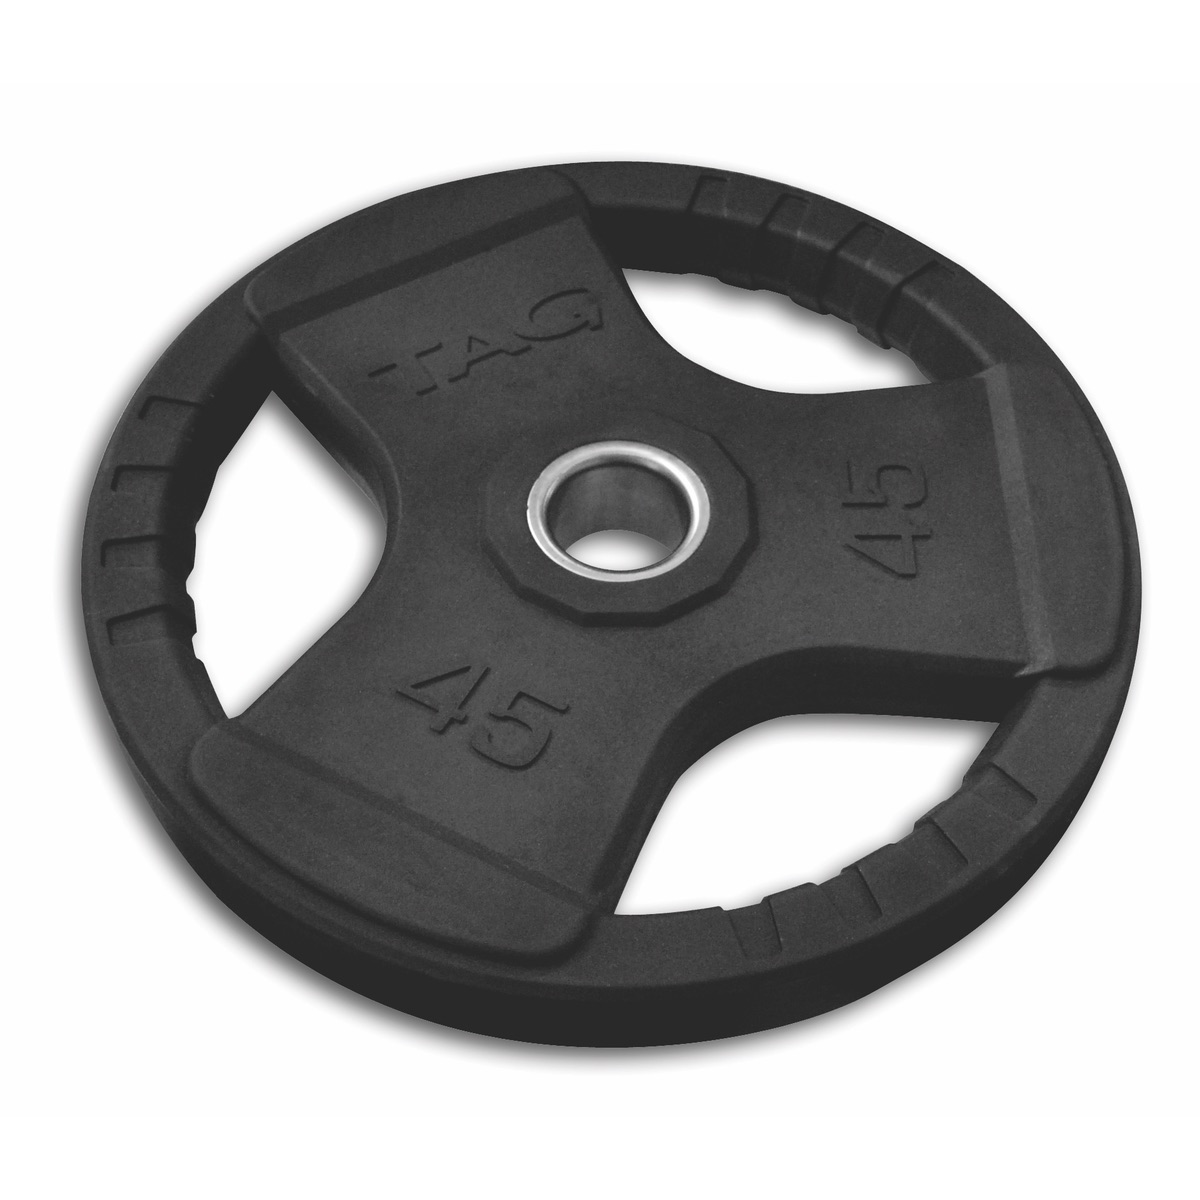 Tag Rubber Olympic Plate Fitness